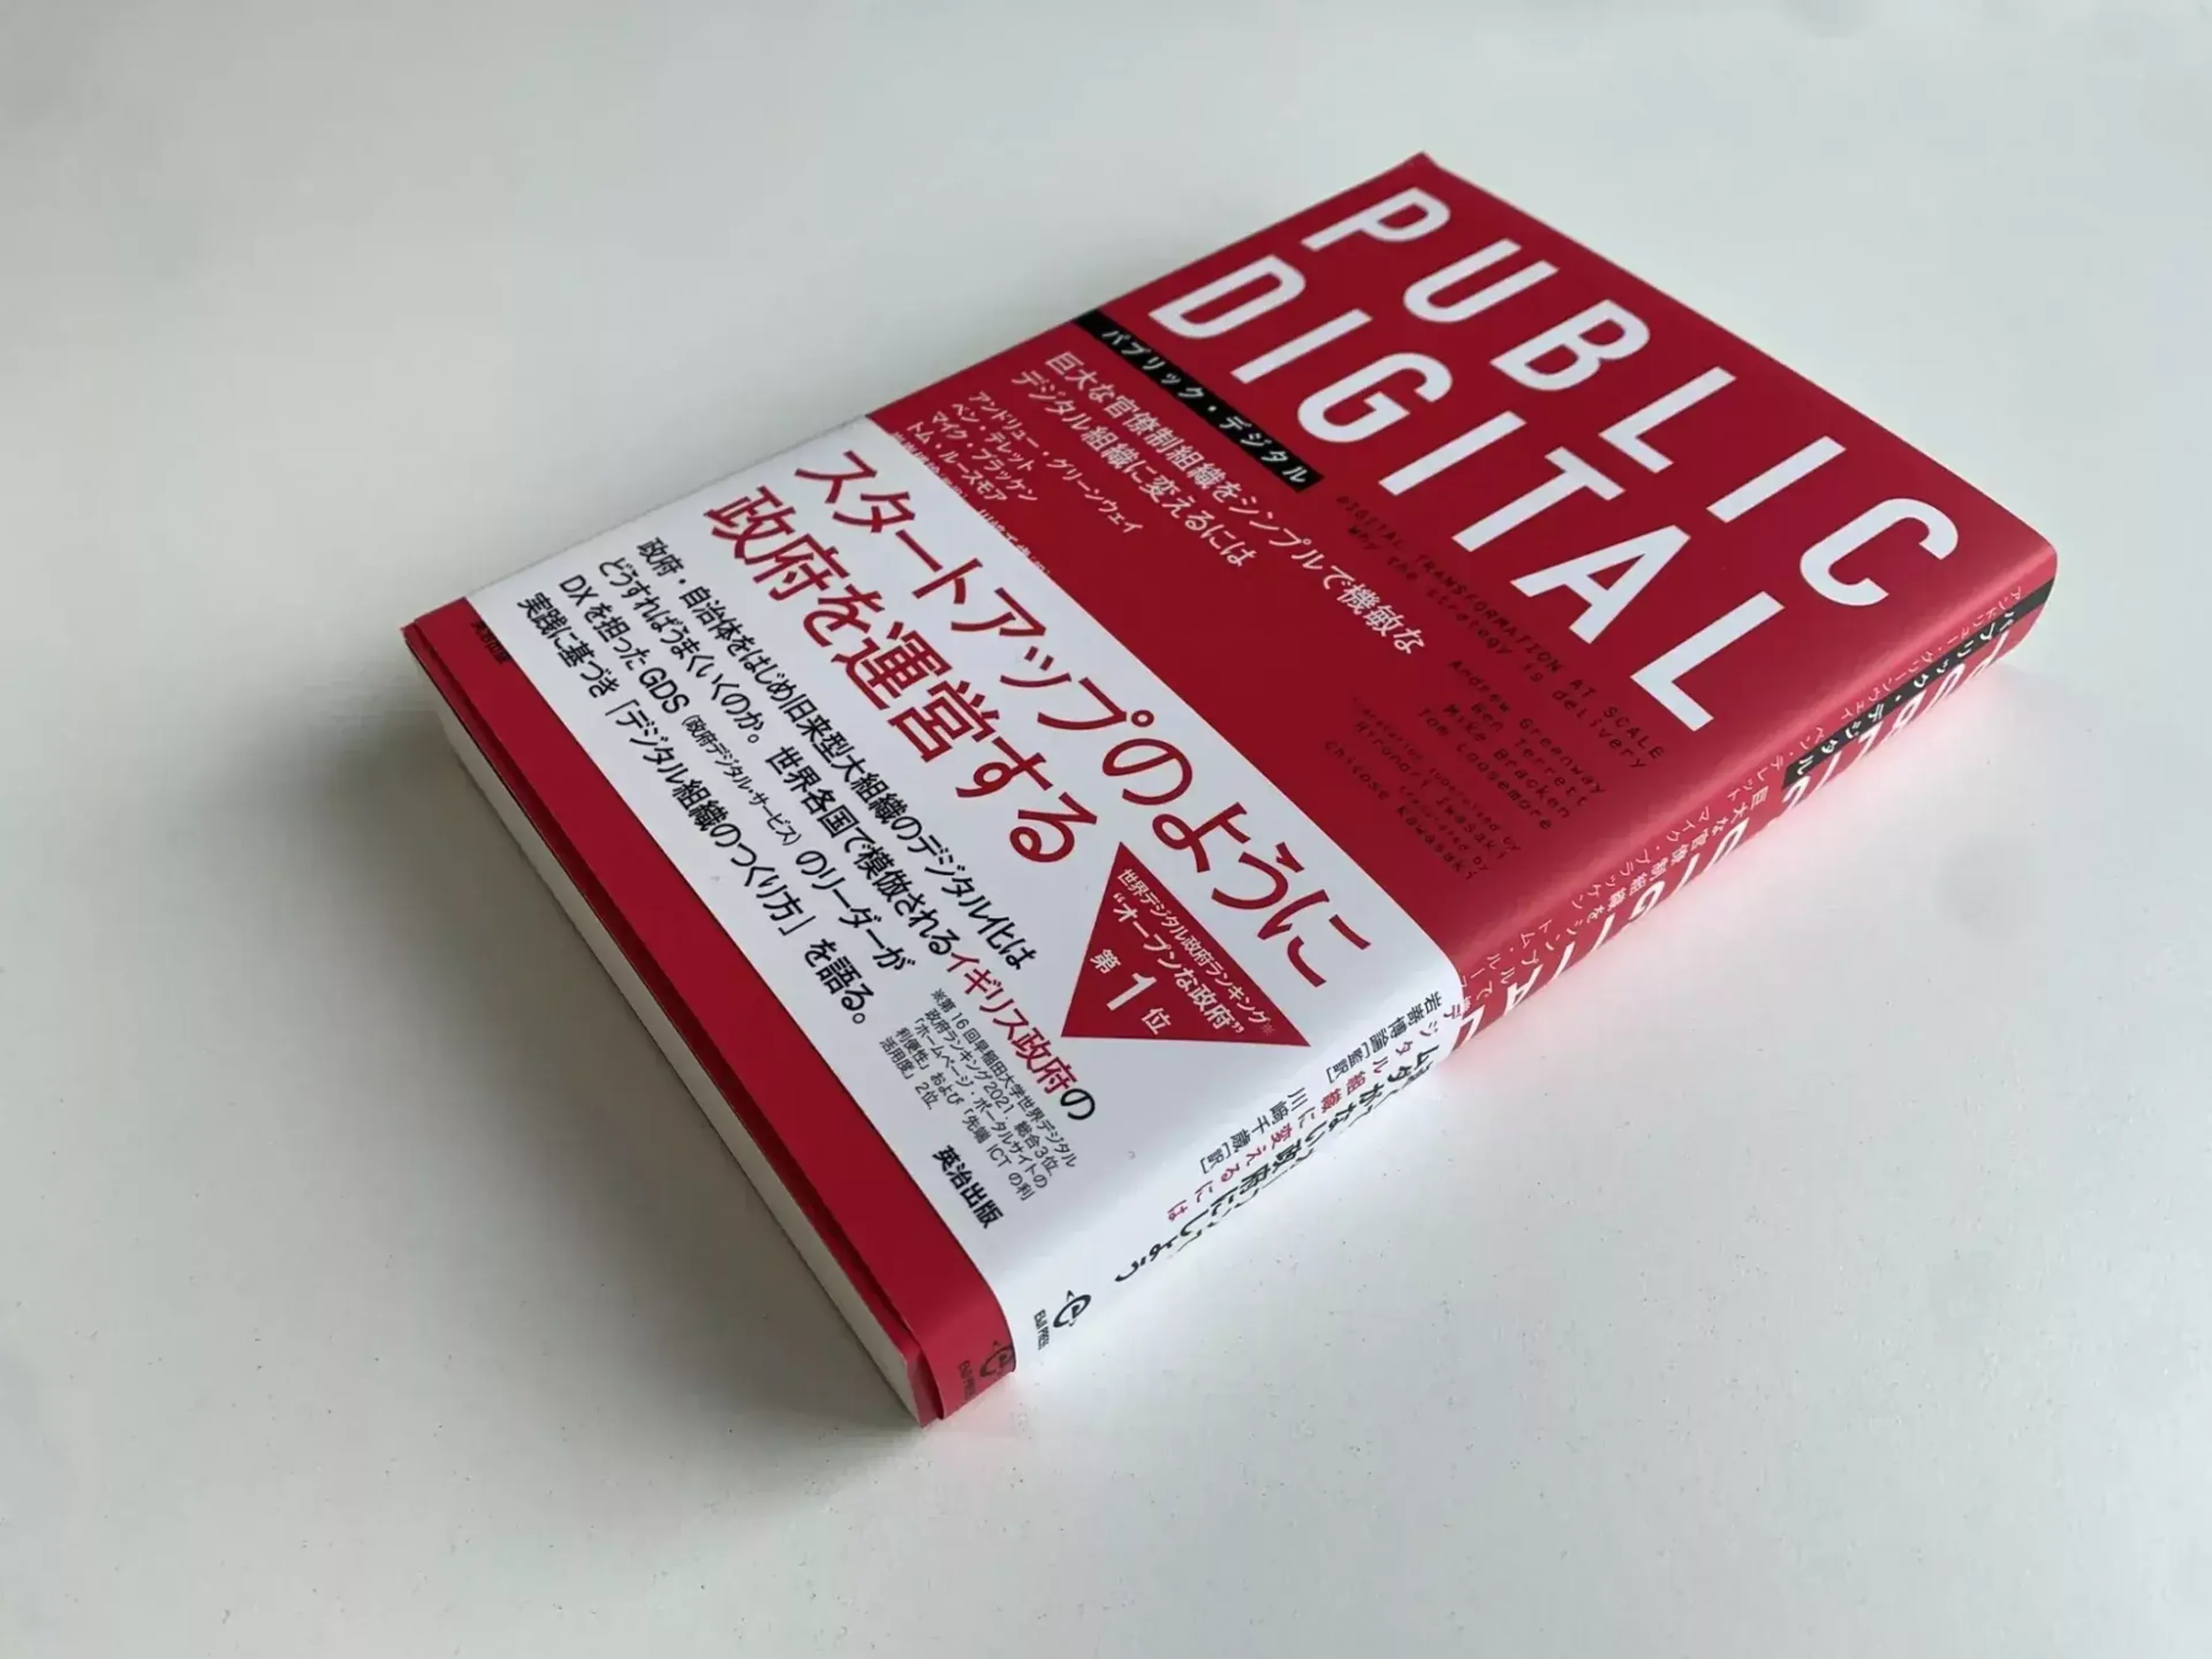 The Japanese edition of Public Digital’s book, Digital Transformation at Scale